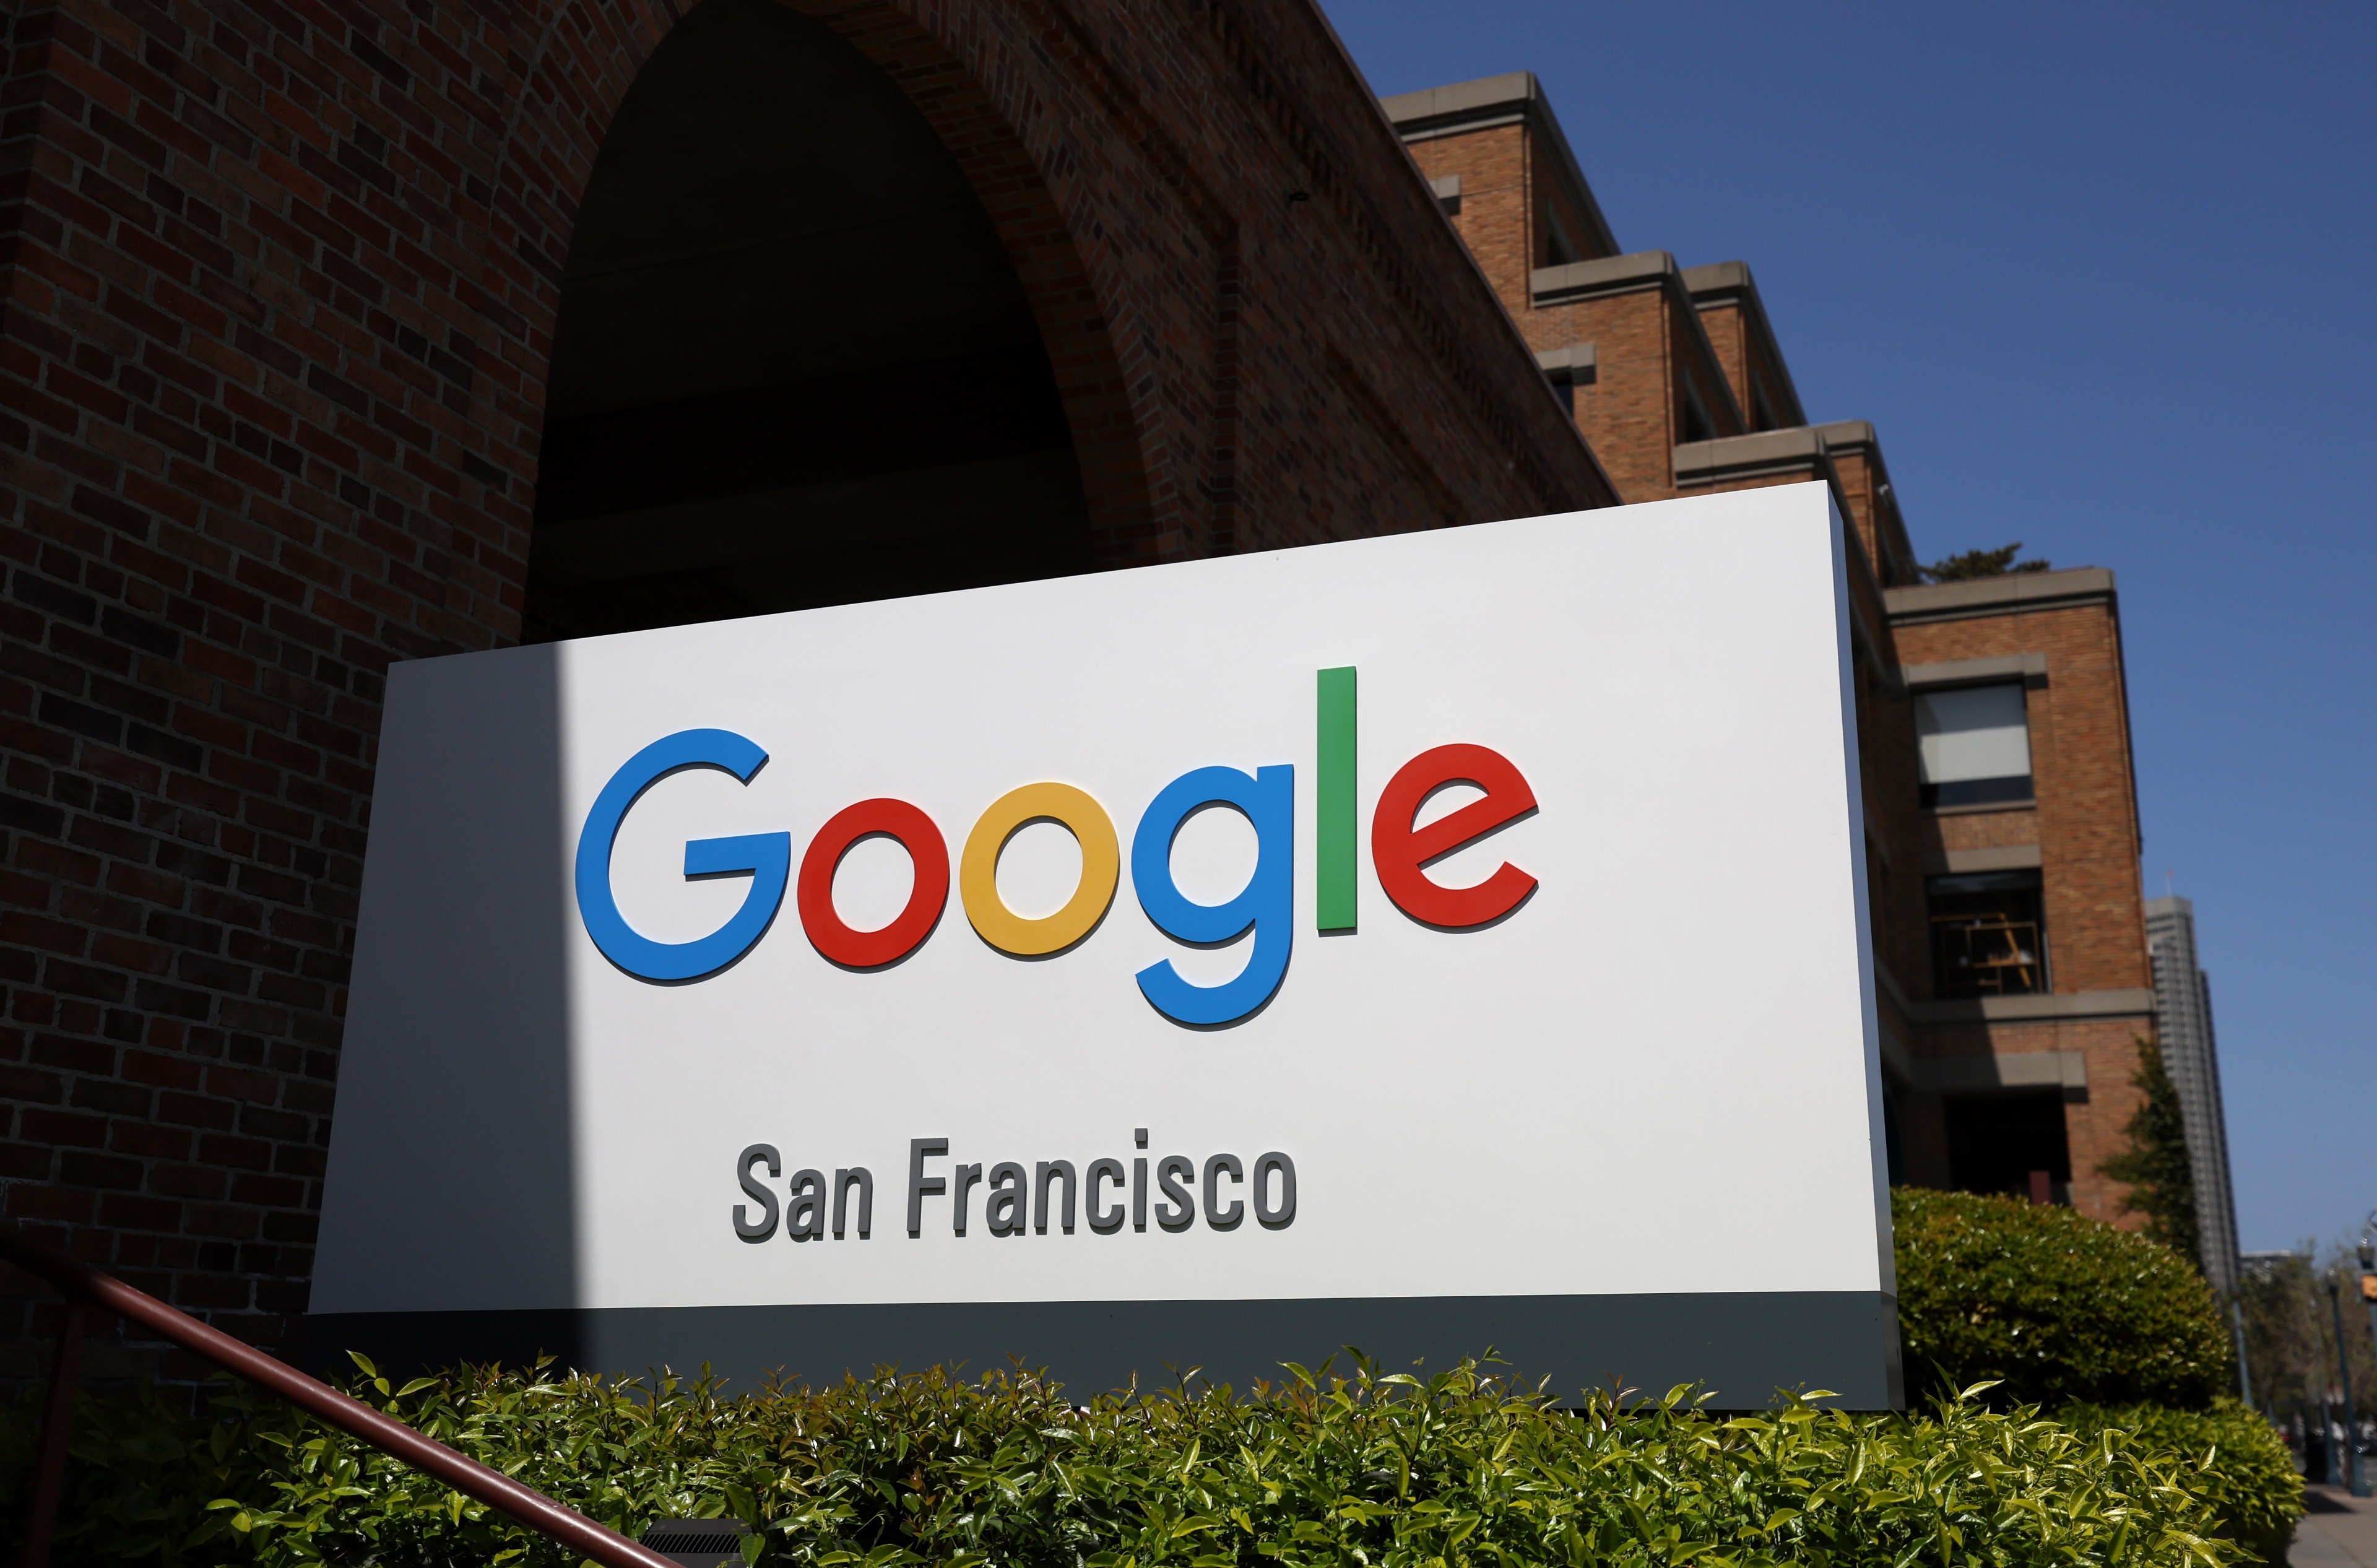 A Google sign with "San Francisco" below, in front of a brick building with arches and greenery.